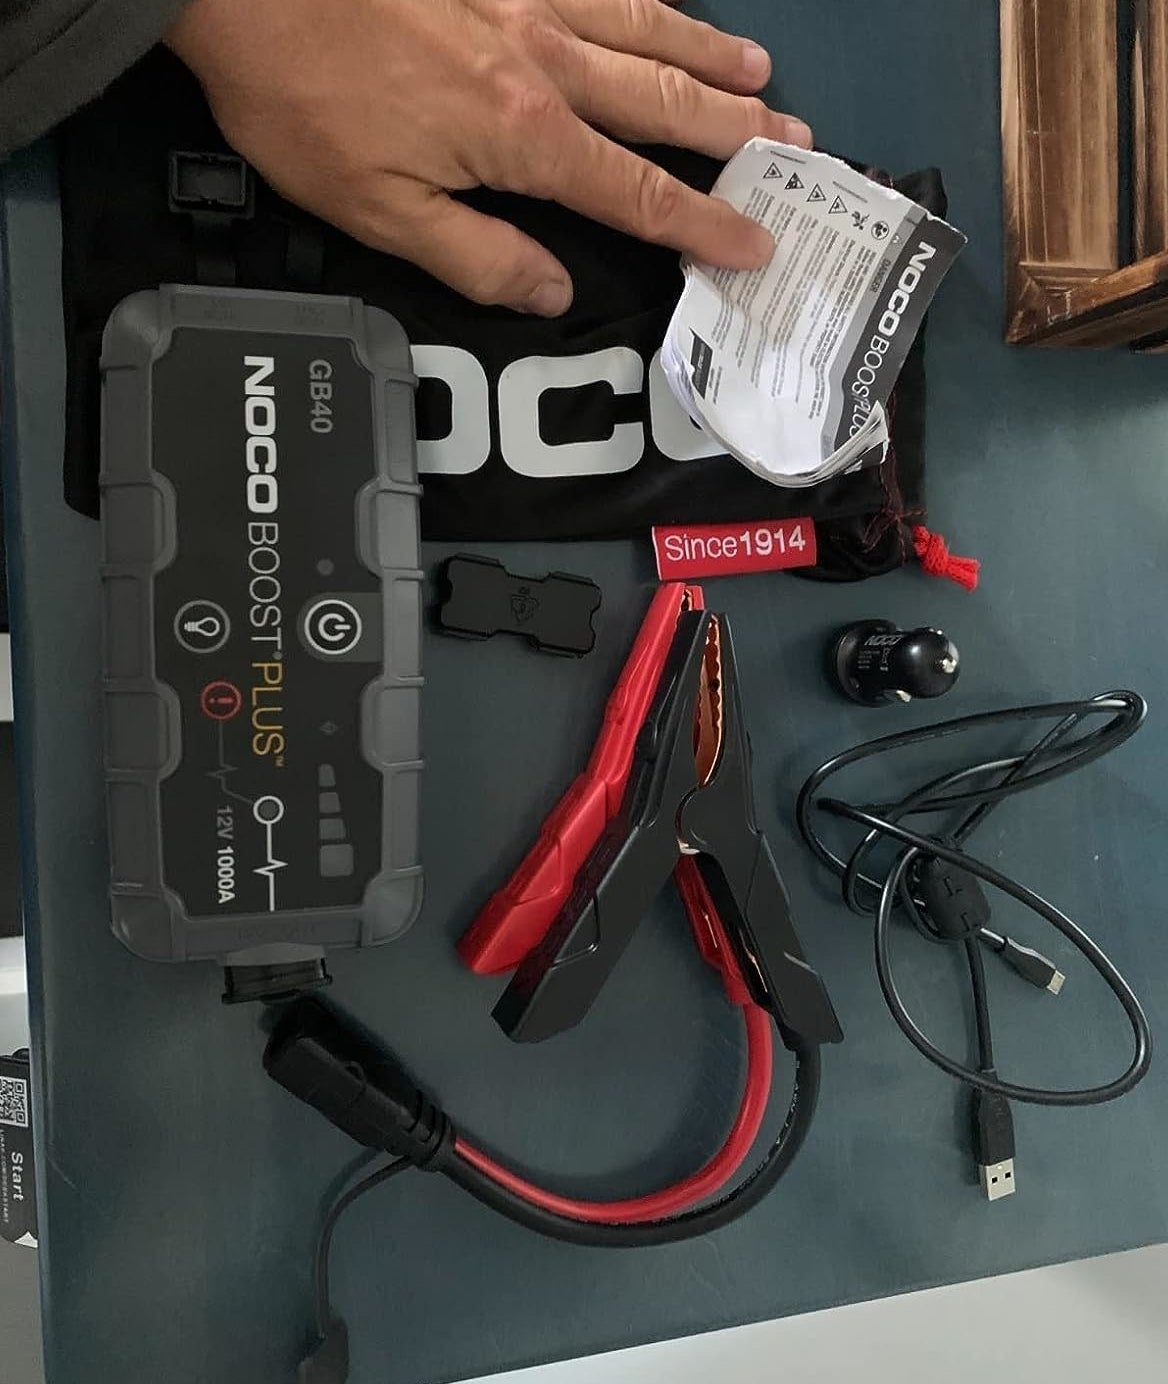 a reviewer photo of the jump starter battery and all the included accessories